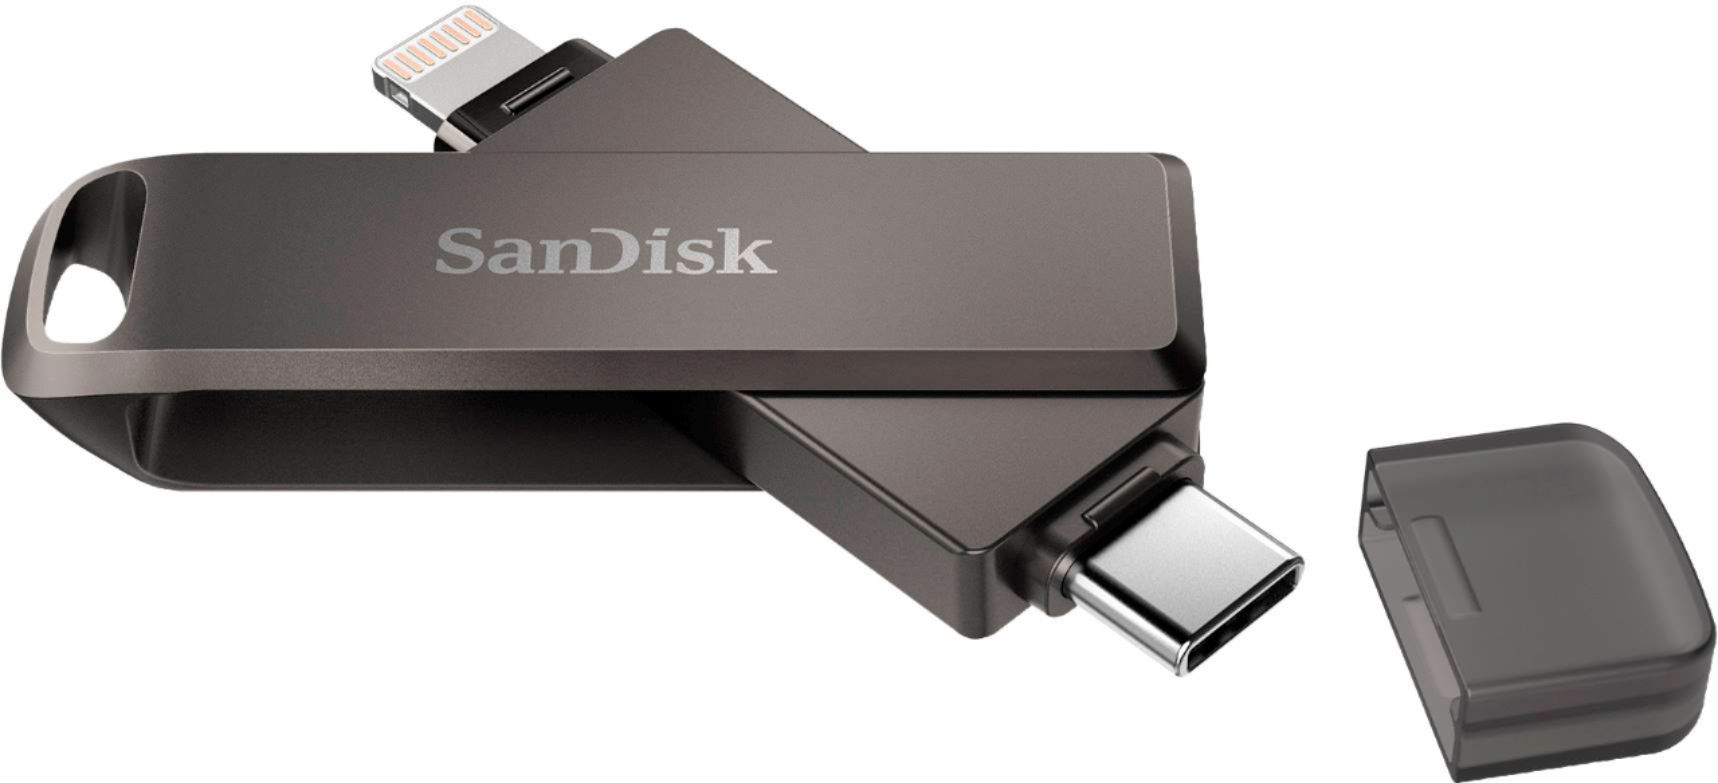 SanDisk 256GB iXpand Phone Drive Luxe for iPhone Lightning and Type-C  Devices Black SDIX70N-256G-AN6NE - Best Buy